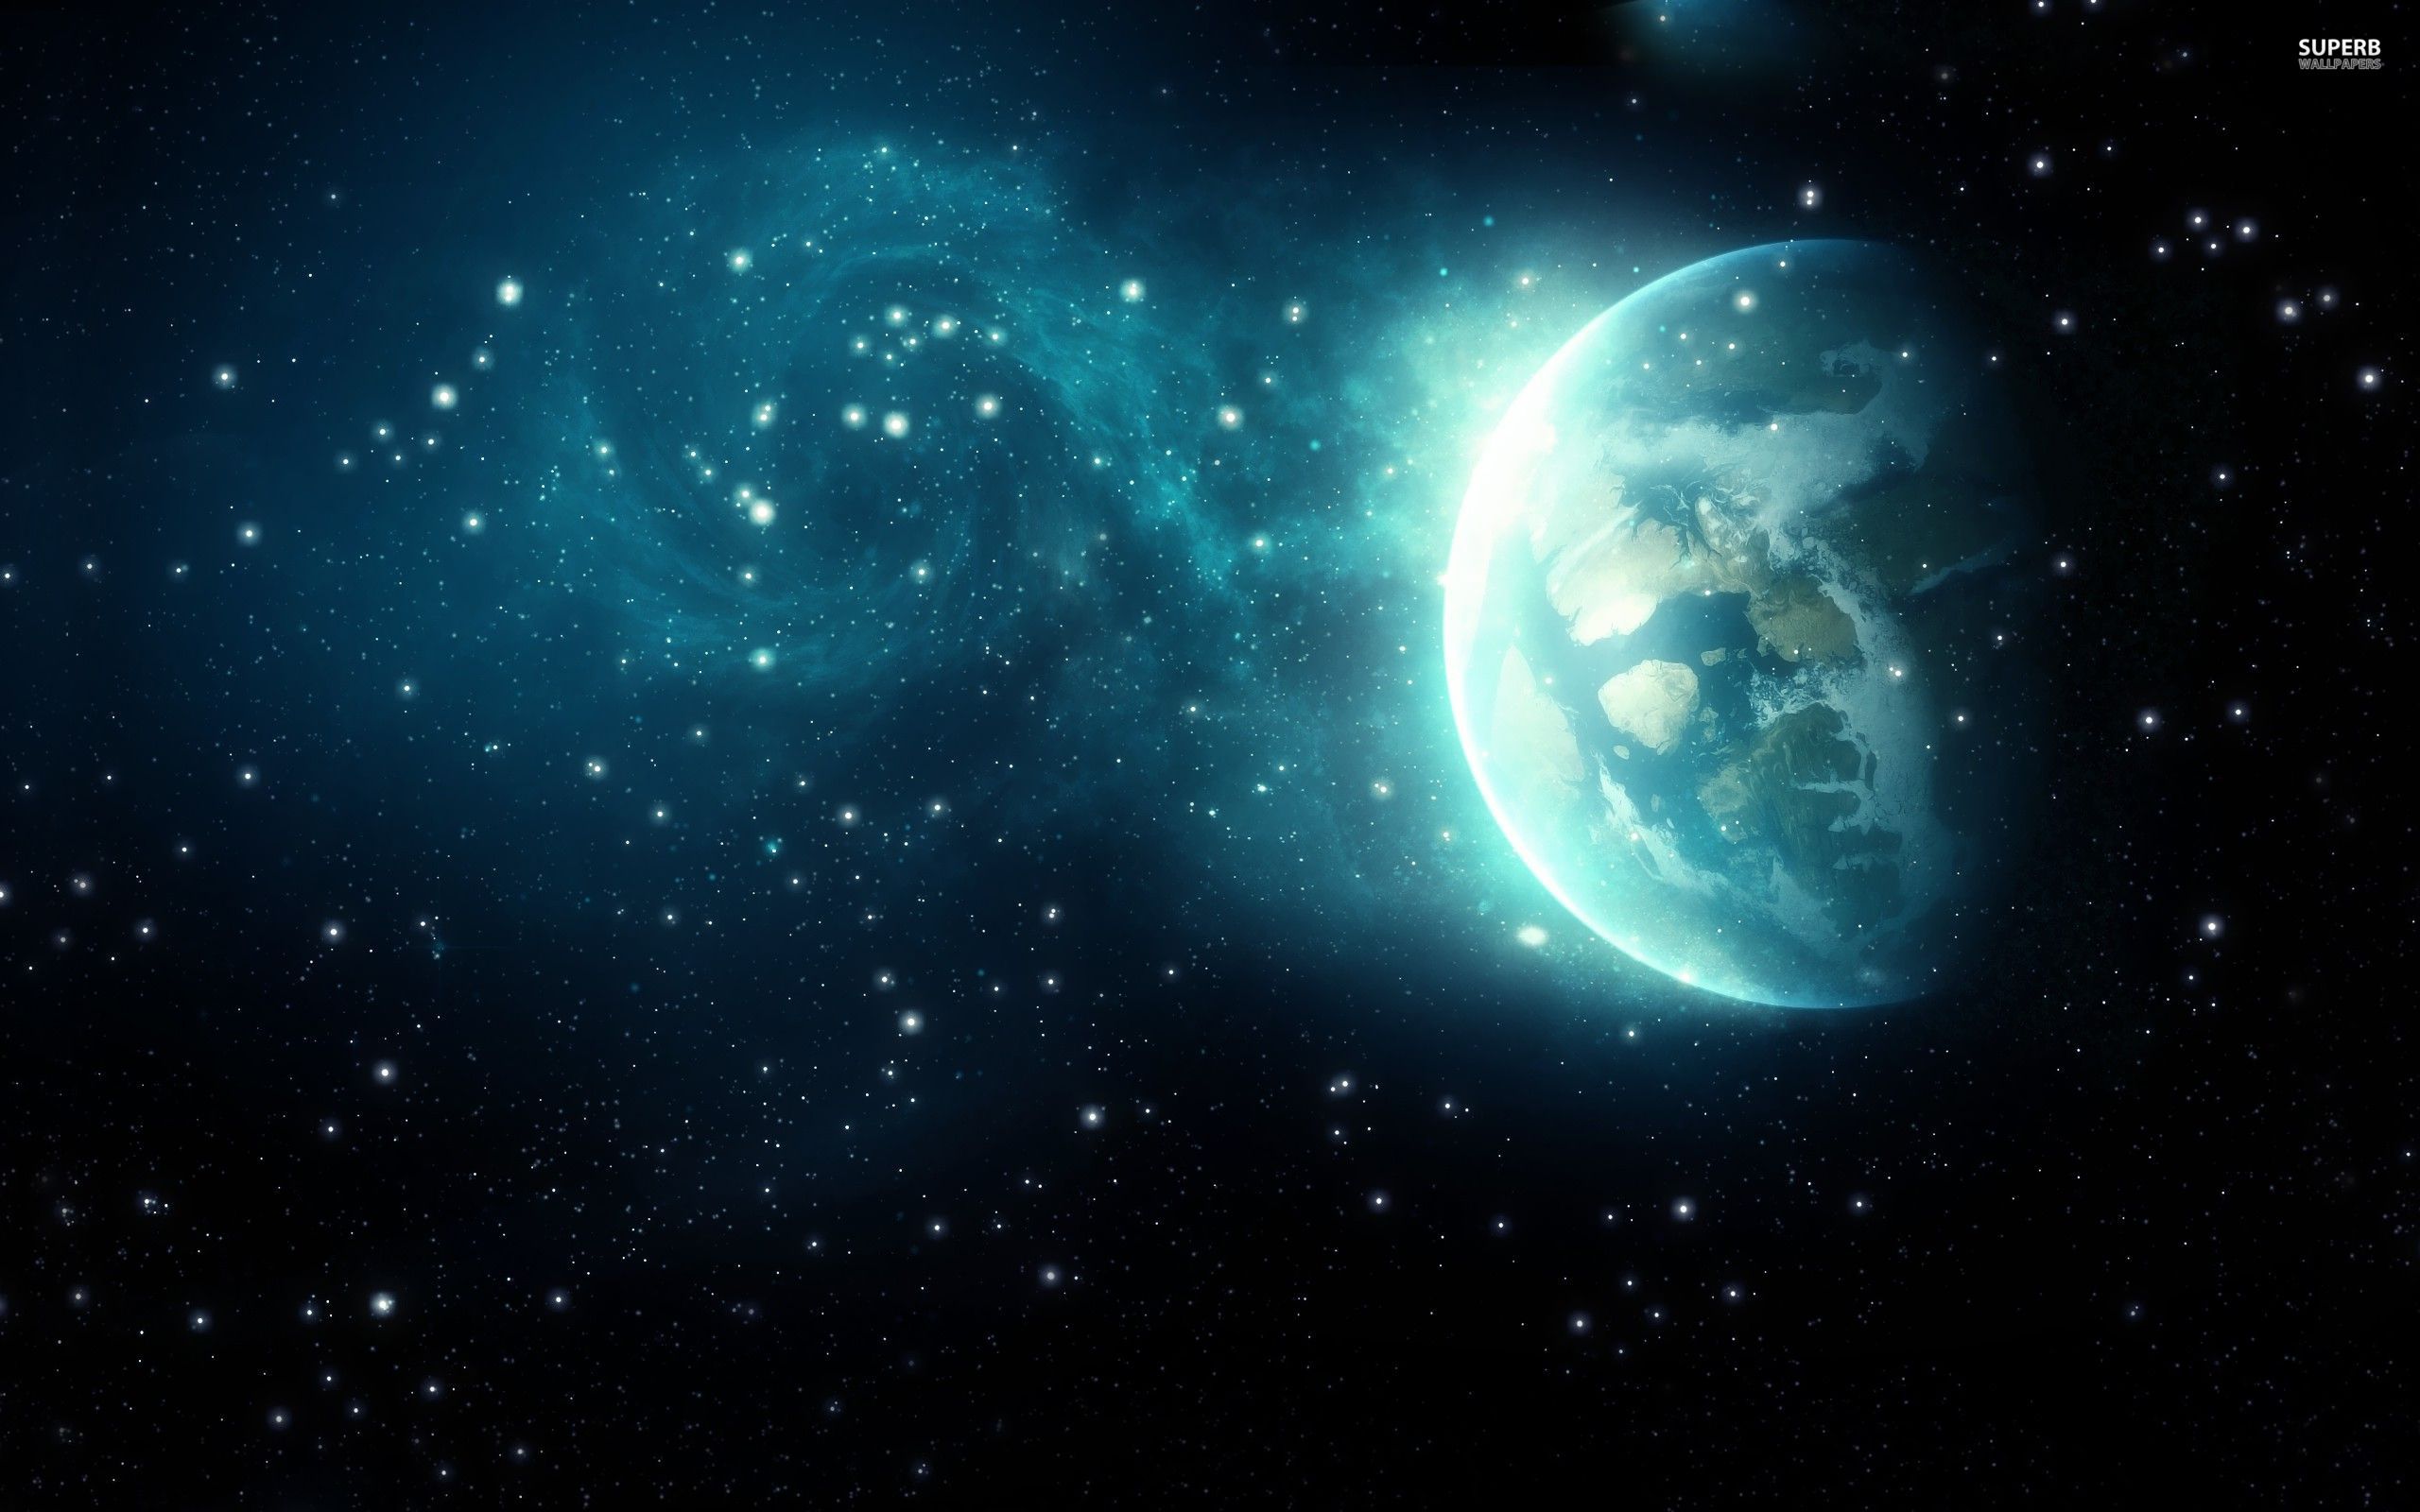 Blue space wallpaper - Space wallpapers - #21886